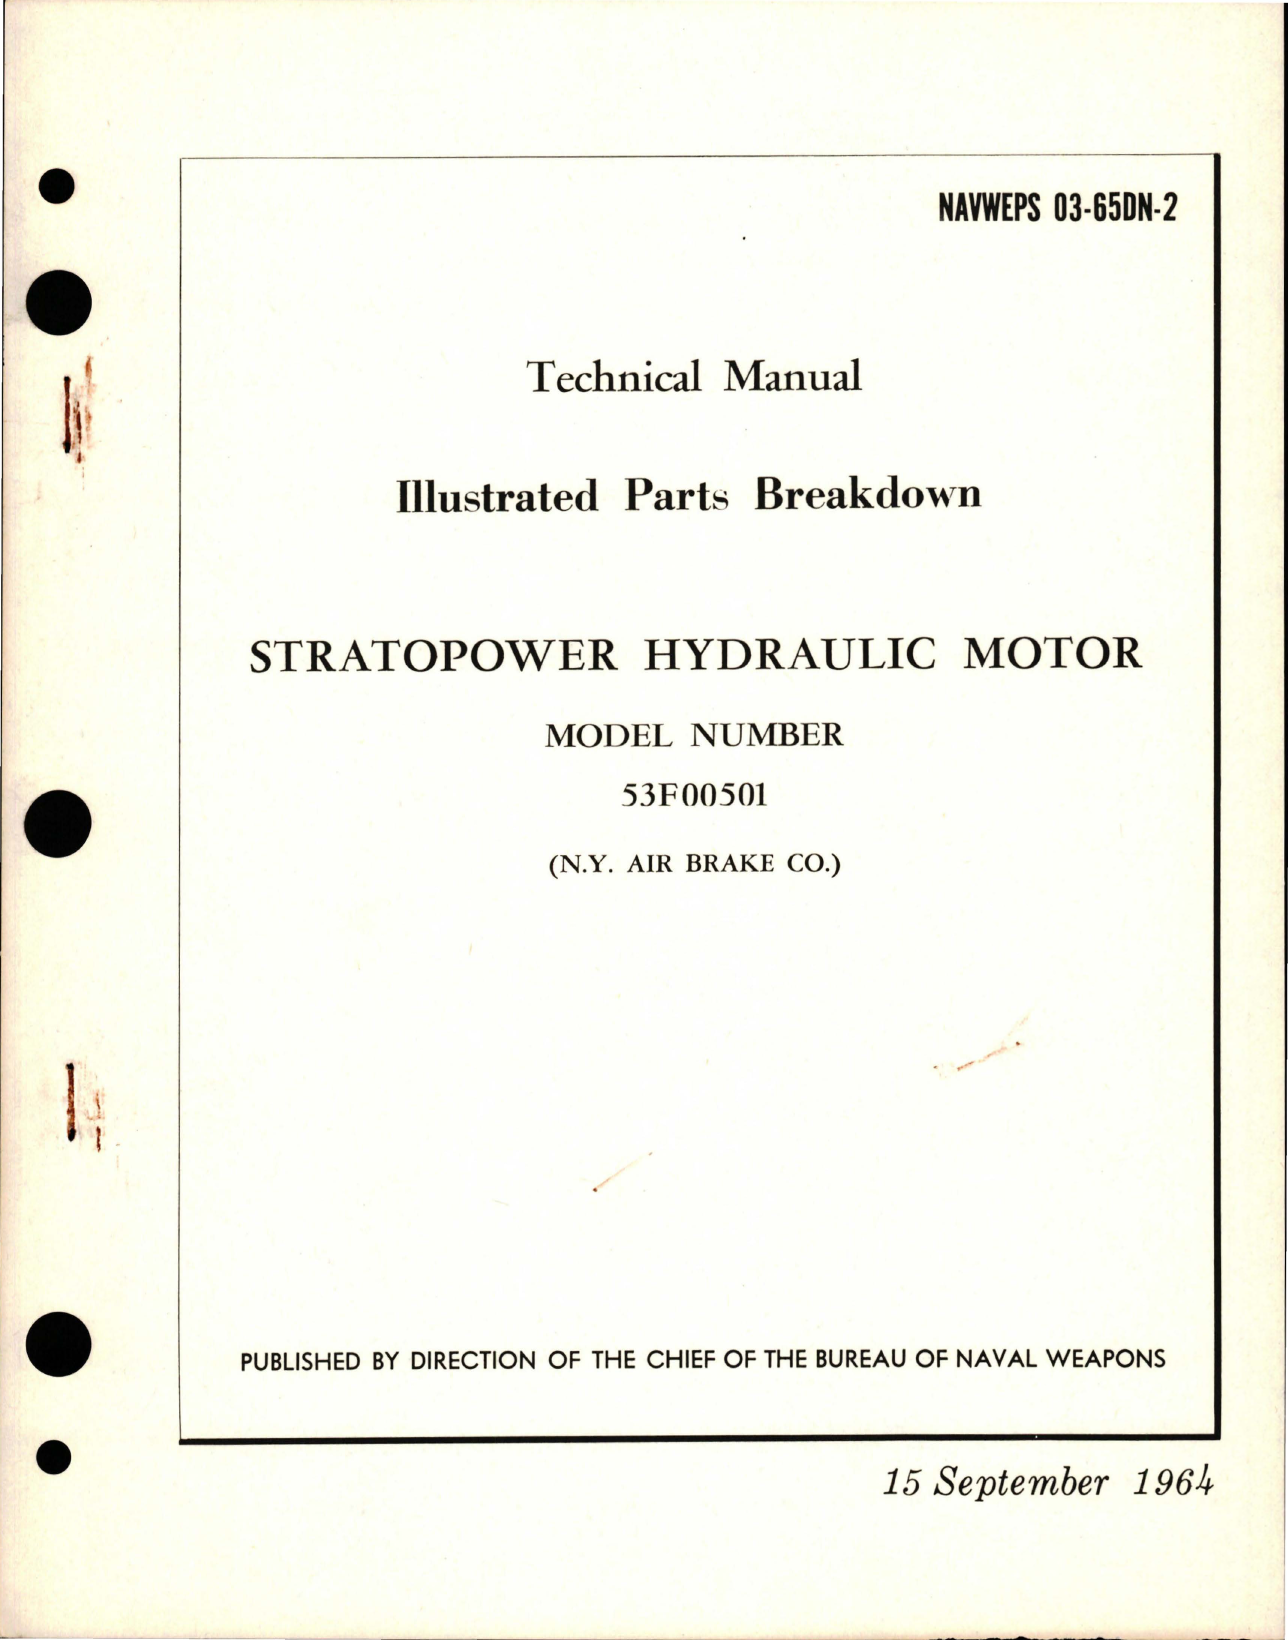 Sample page 1 from AirCorps Library document: Illustrated Parts Breakdown for Stratopower Hydraulic Motor - Model 53F00501 